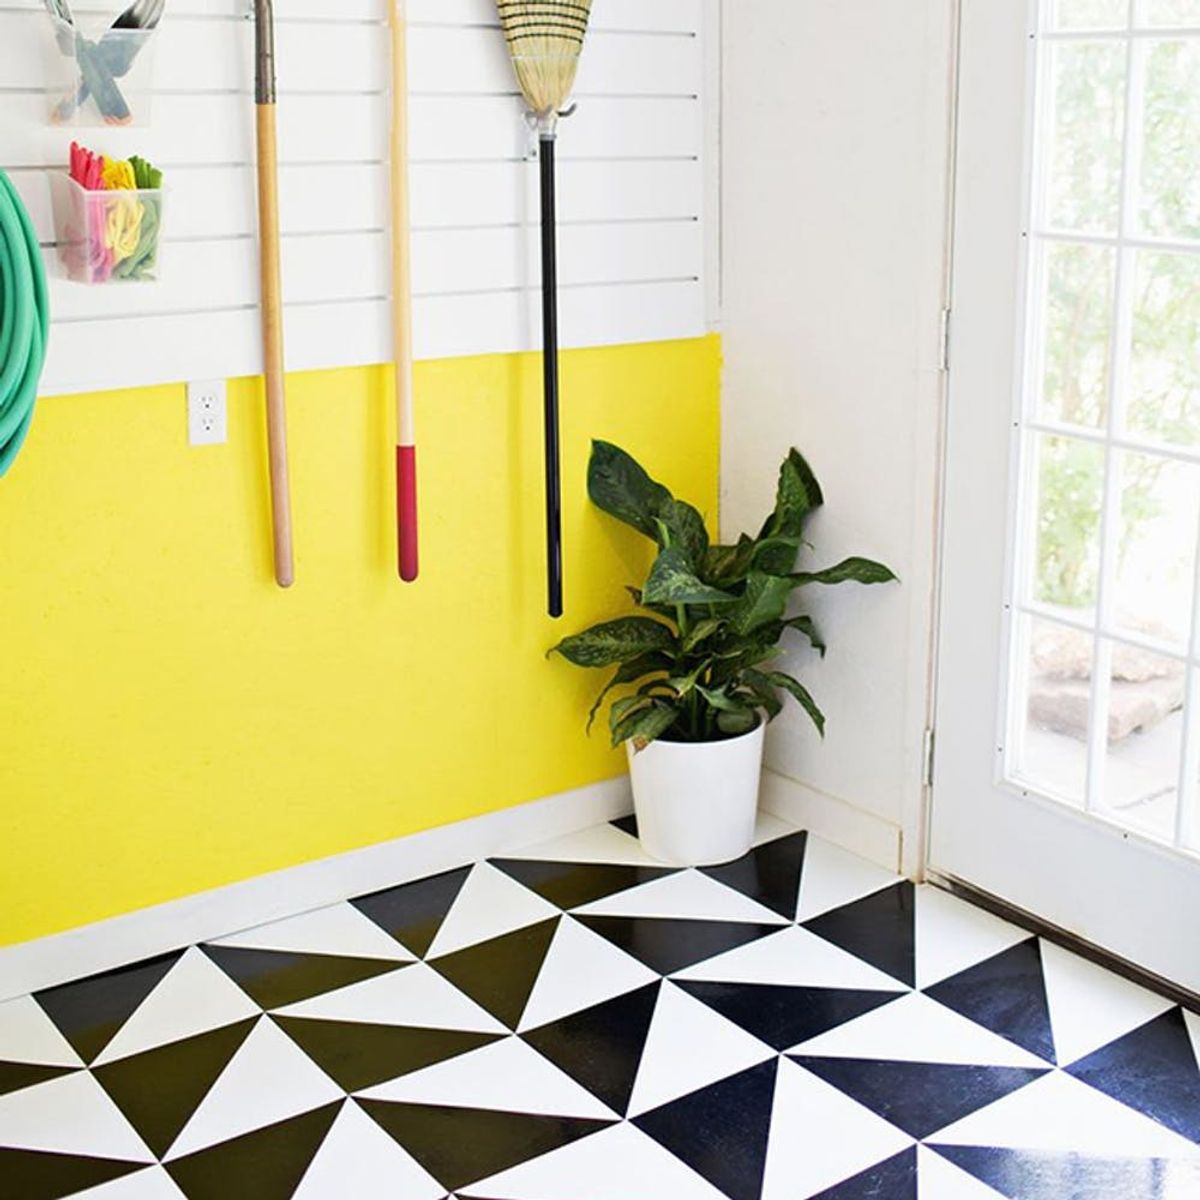 9 Flooring Updates You Can Do in a Weekend